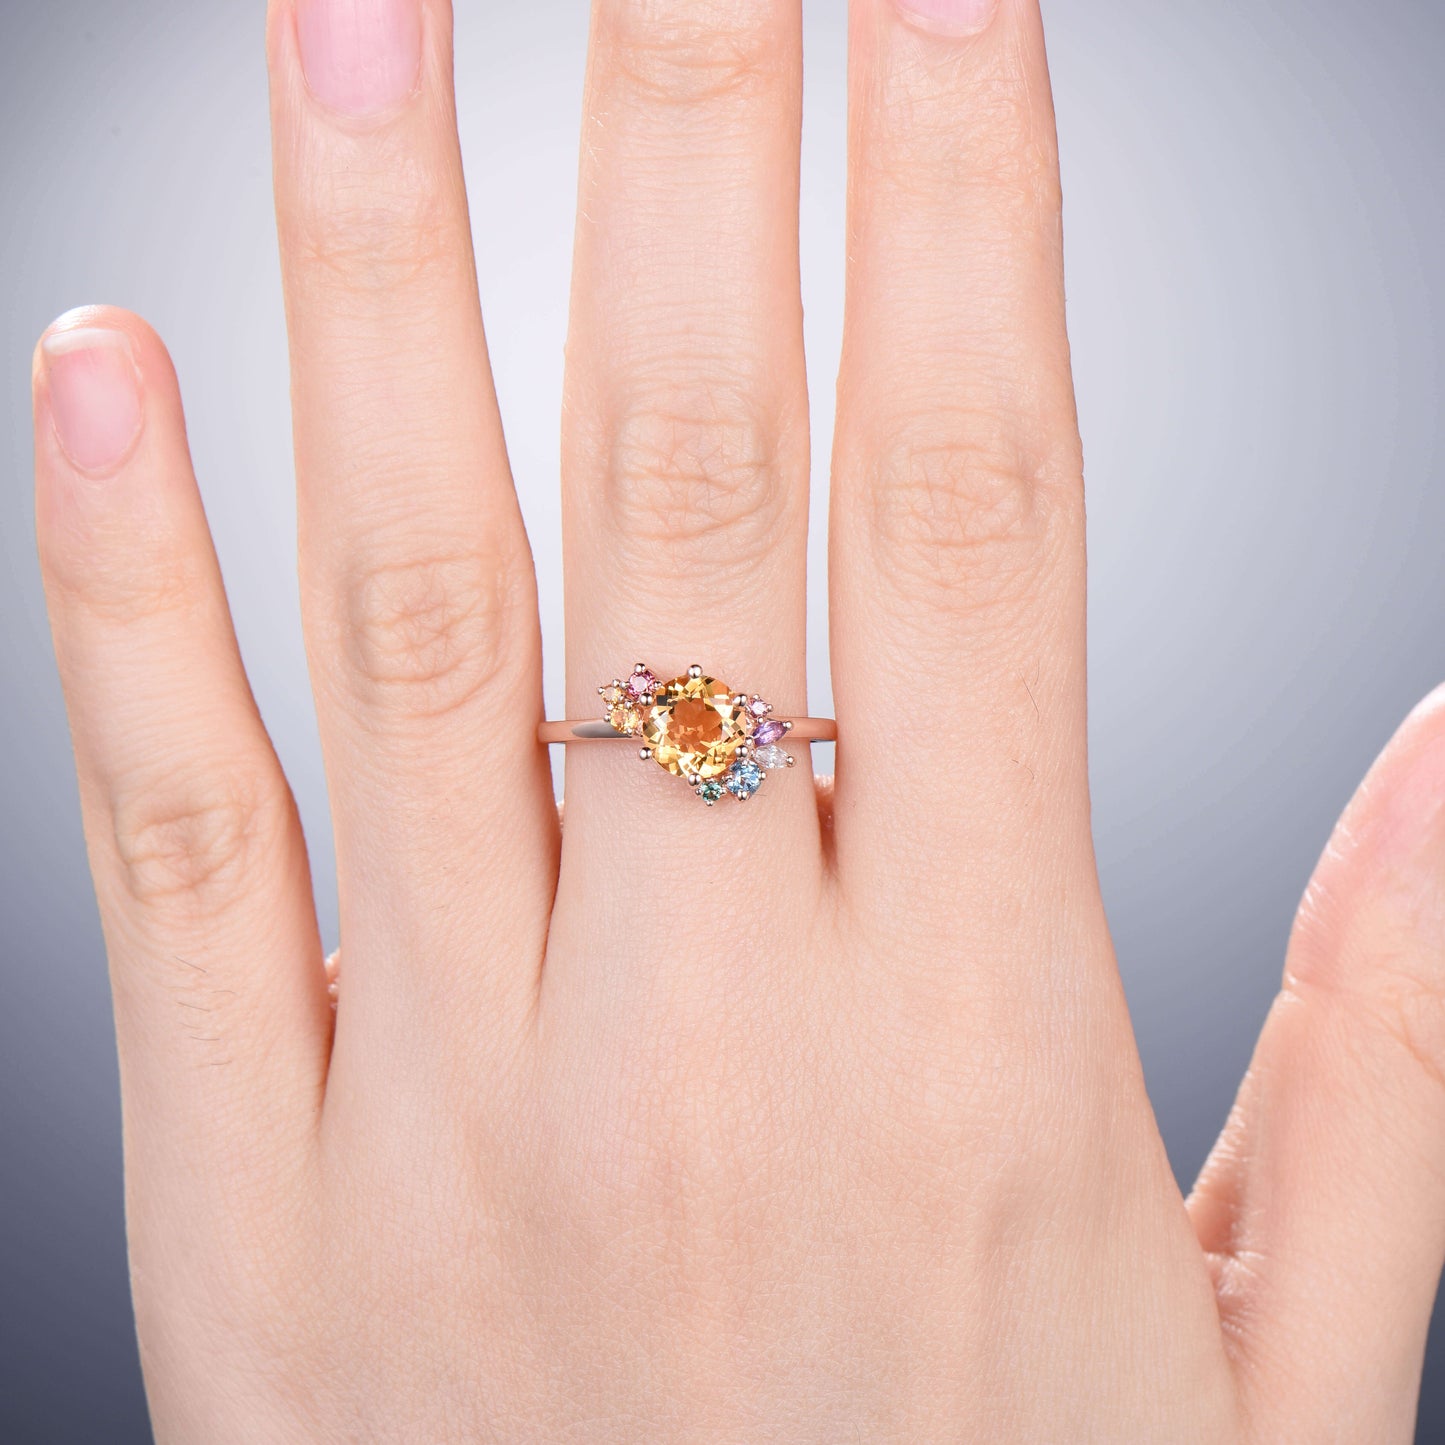 Unique Rainbow Engagement Ring Vintage Citrine Engagement Ring Gold Cluster Natural Crystal Wedding Ring For Women art deco Anniversary Gift - PENFINE